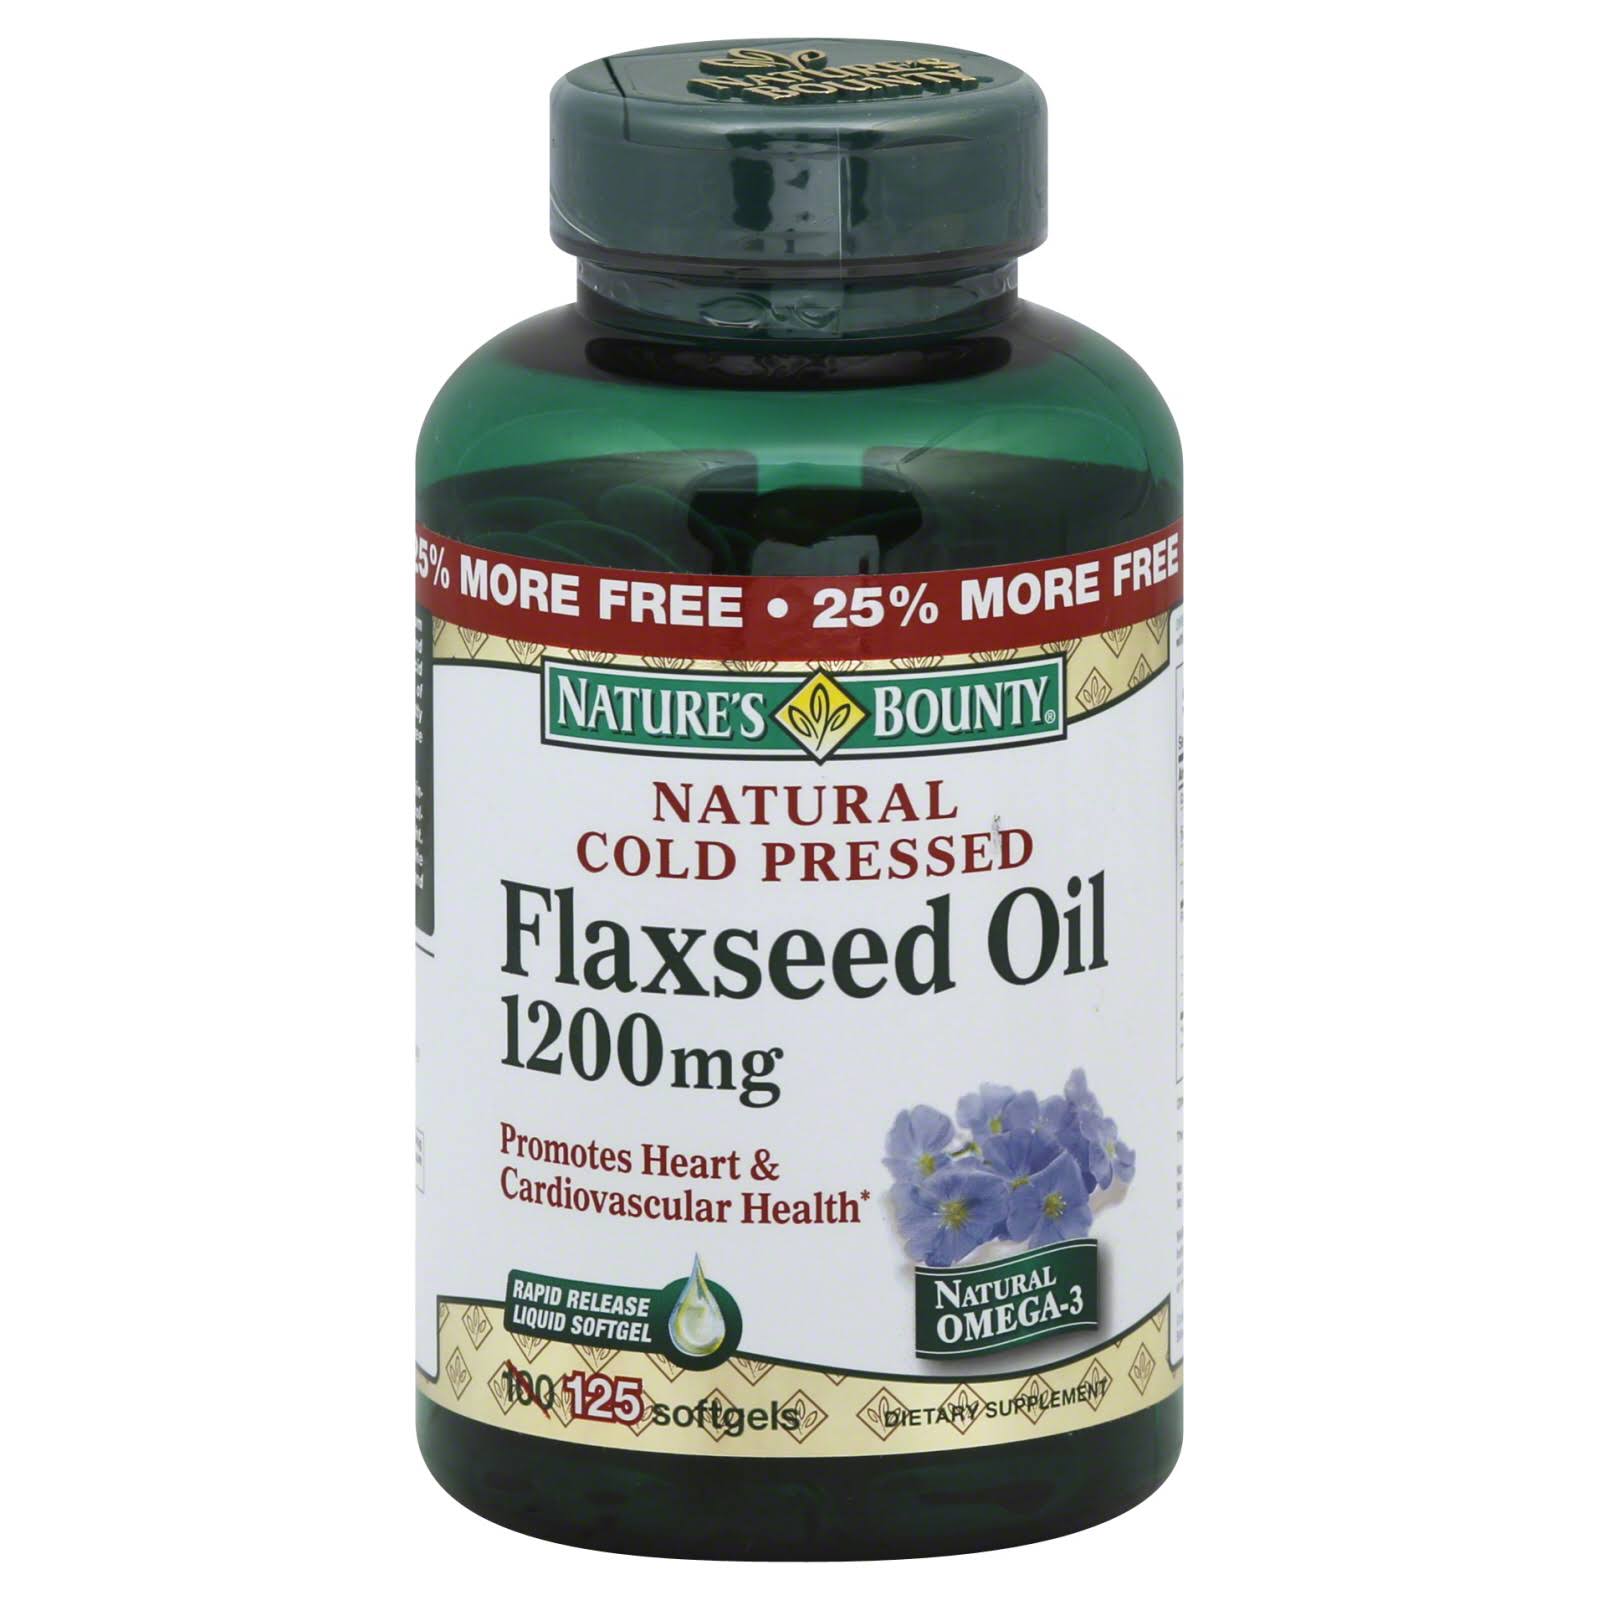 Nature's Bounty Flaxseed Oil Supplement - 1200mg, 125 Softgels